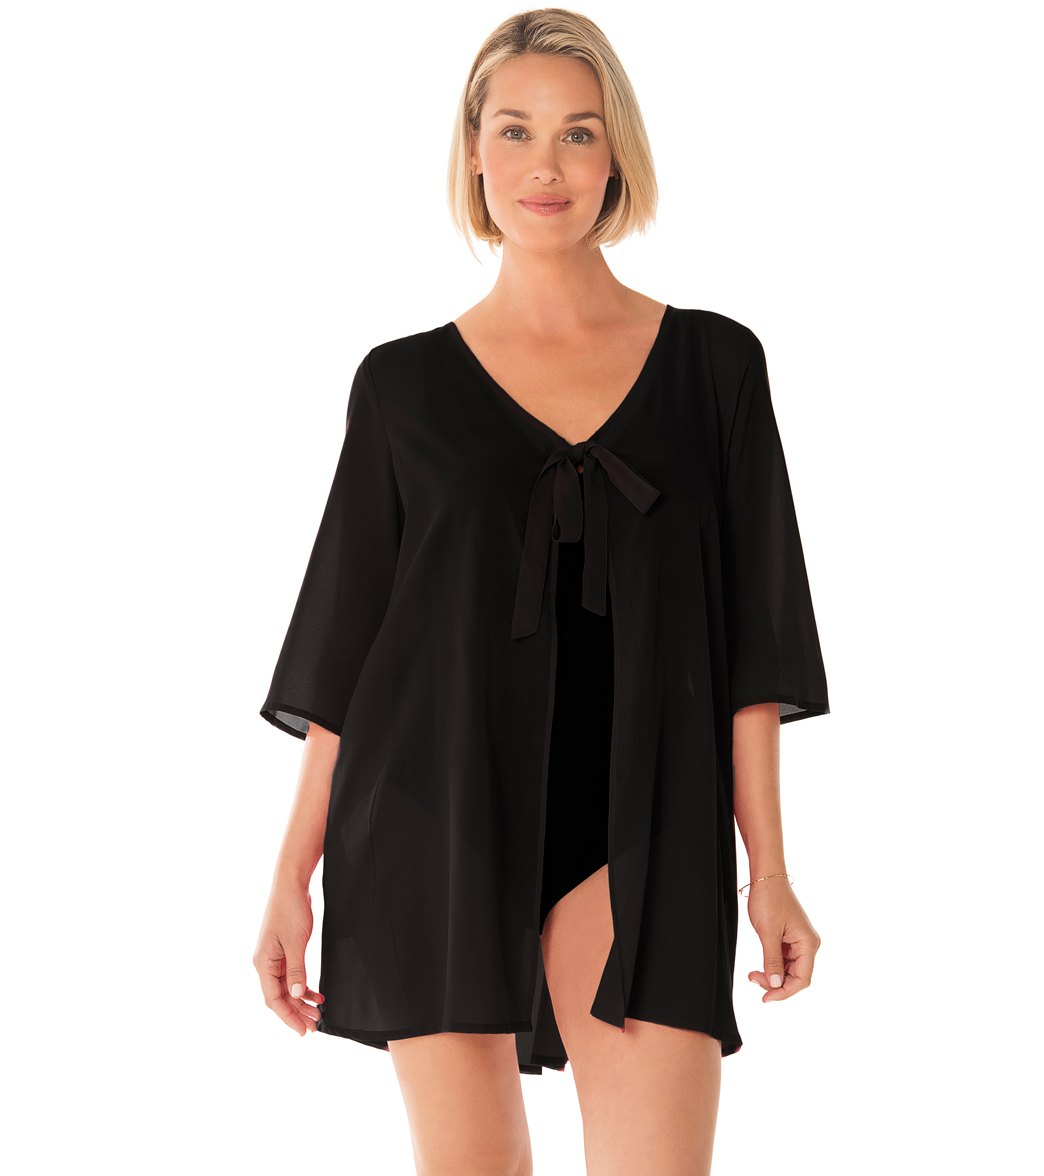 Penbrooke Take Cover Poly Georgette Tie Front Up Dress - Black Small Polyester - Swimoutlet.com